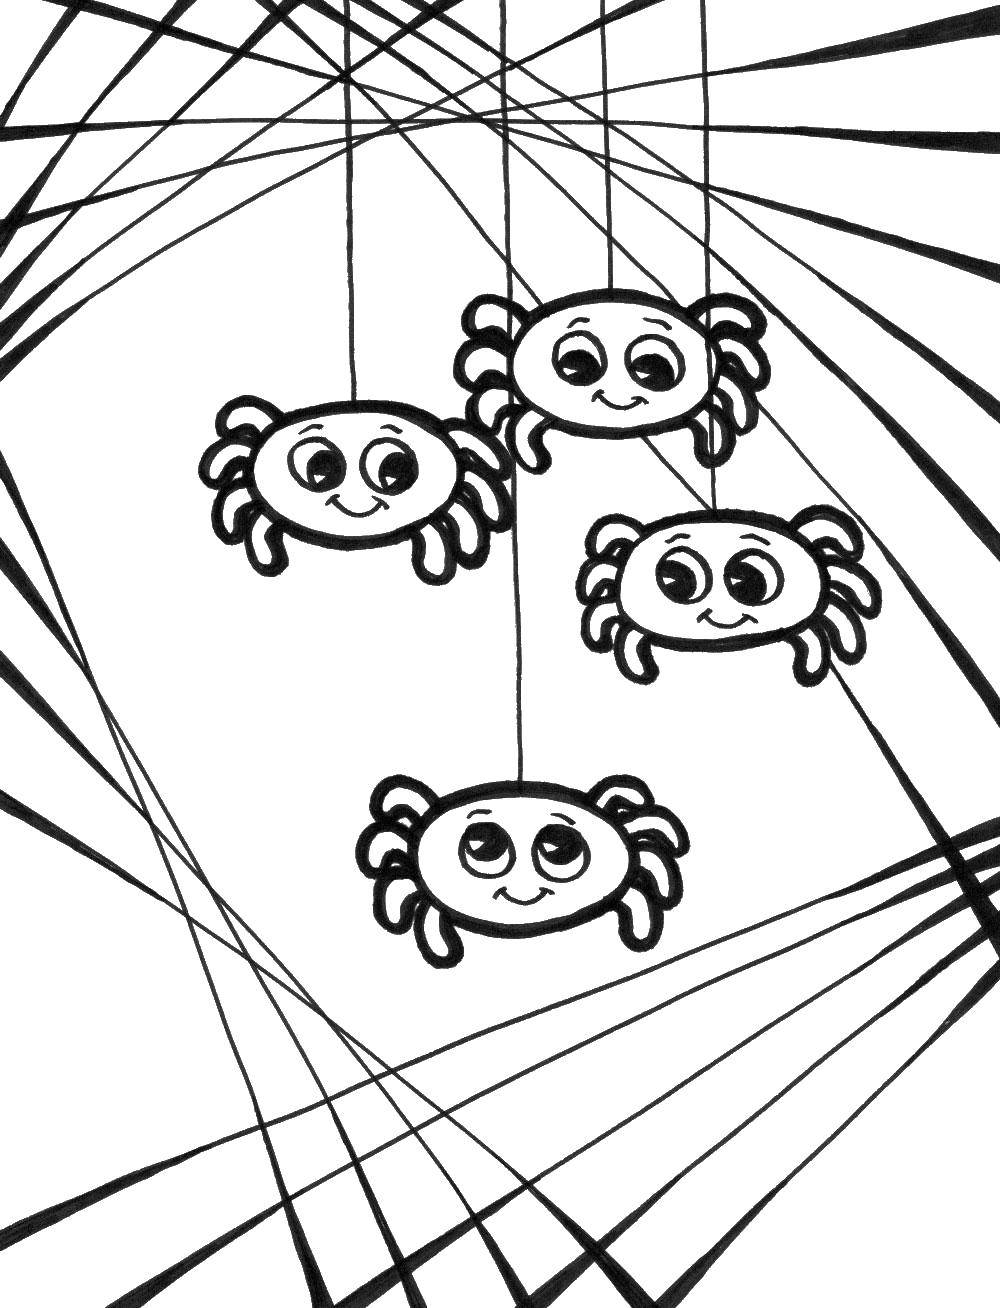 Coloring Spiders. Category spiders. Tags:  Spiders.